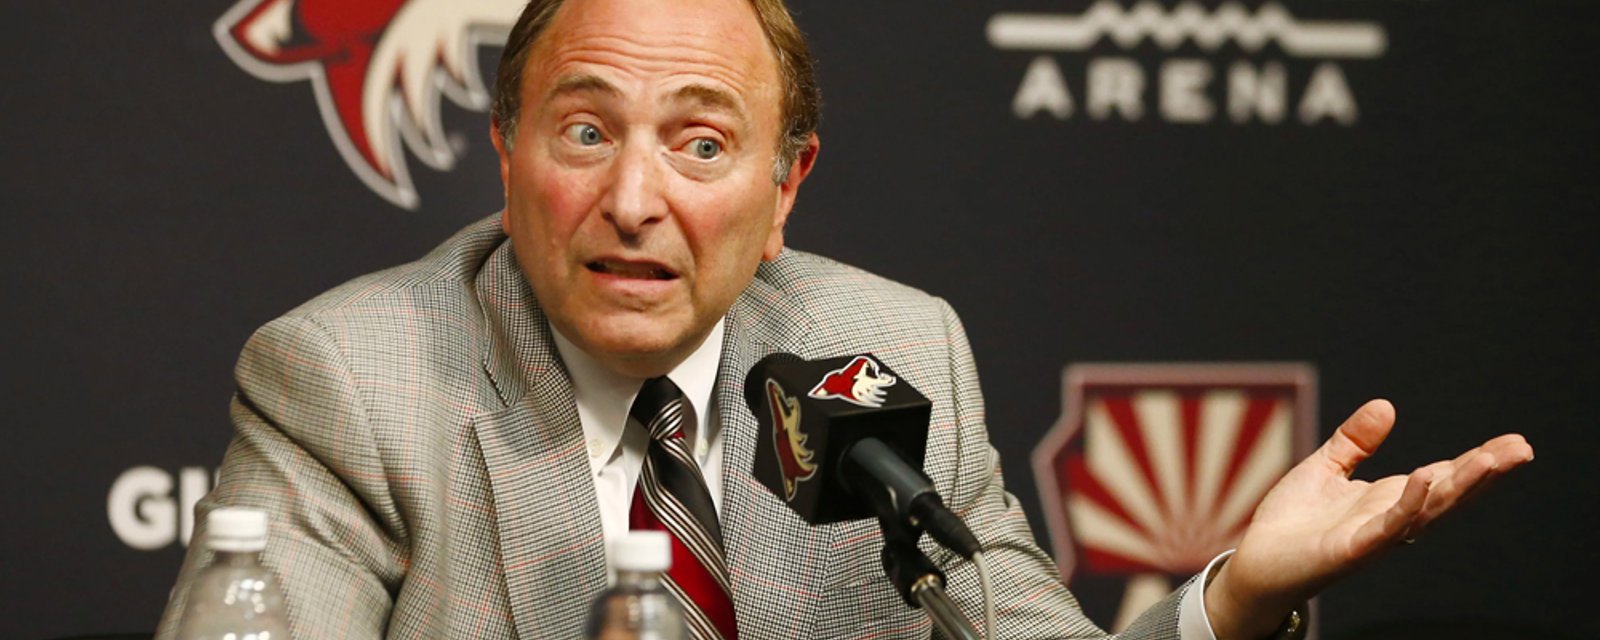 NHL commits to 30 year “non-relocation” agreement with Coyotes